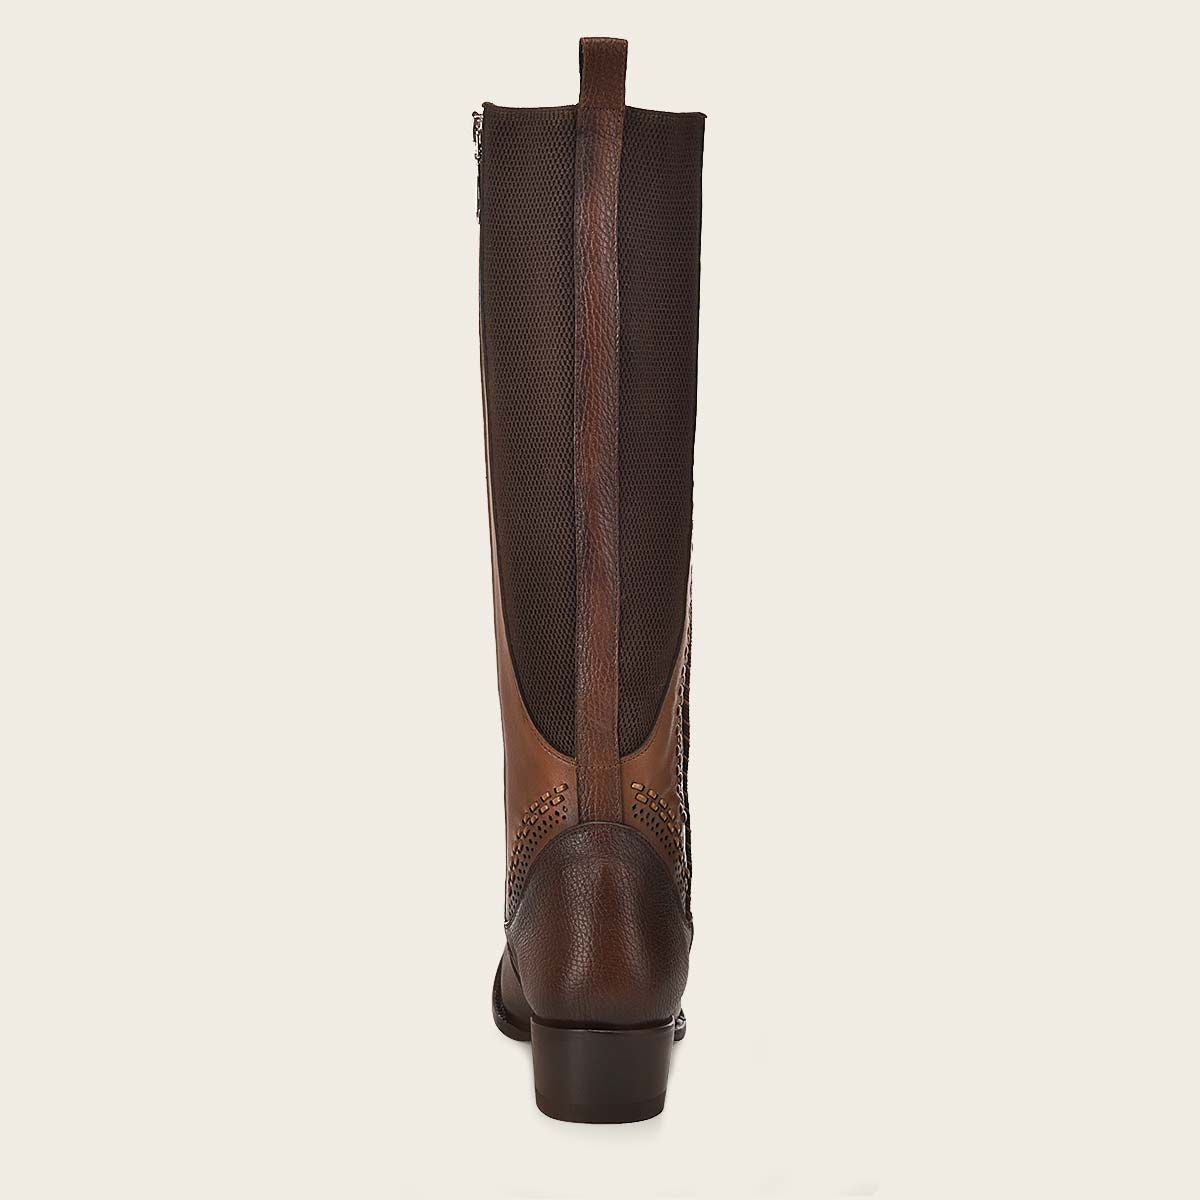 1X4IRS - Cuadra brown casual fashion leather stitched tall boots for women